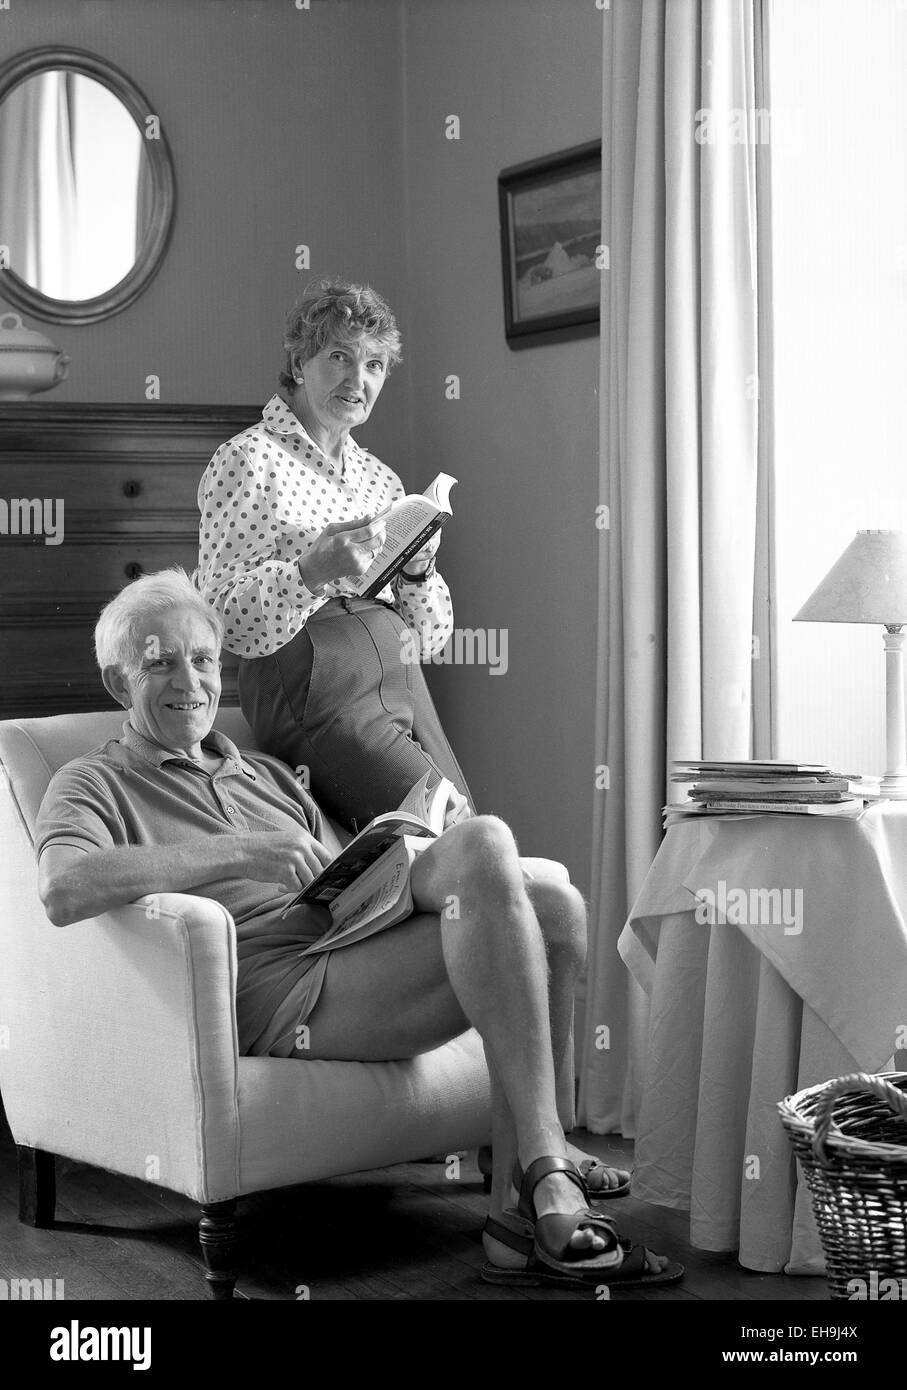 Retirement age couple in a front room positioned to a corner by the side of a window. The man is seated in a comfortable armchair, the woman standing and resting on the back of the chair by his side. The couple are holding books and looking into camera. They are relaxed and smiling. The man is wearing shorts and sandals, the woman trousers and long sleeved patterned blouse. The room setting is traditional, with curtain, a painting and mirror on the wall, a cloth covered occasional table and a wicker basket (partly cropped out of the shot). The image is black and white and portrait format. Stock Photo